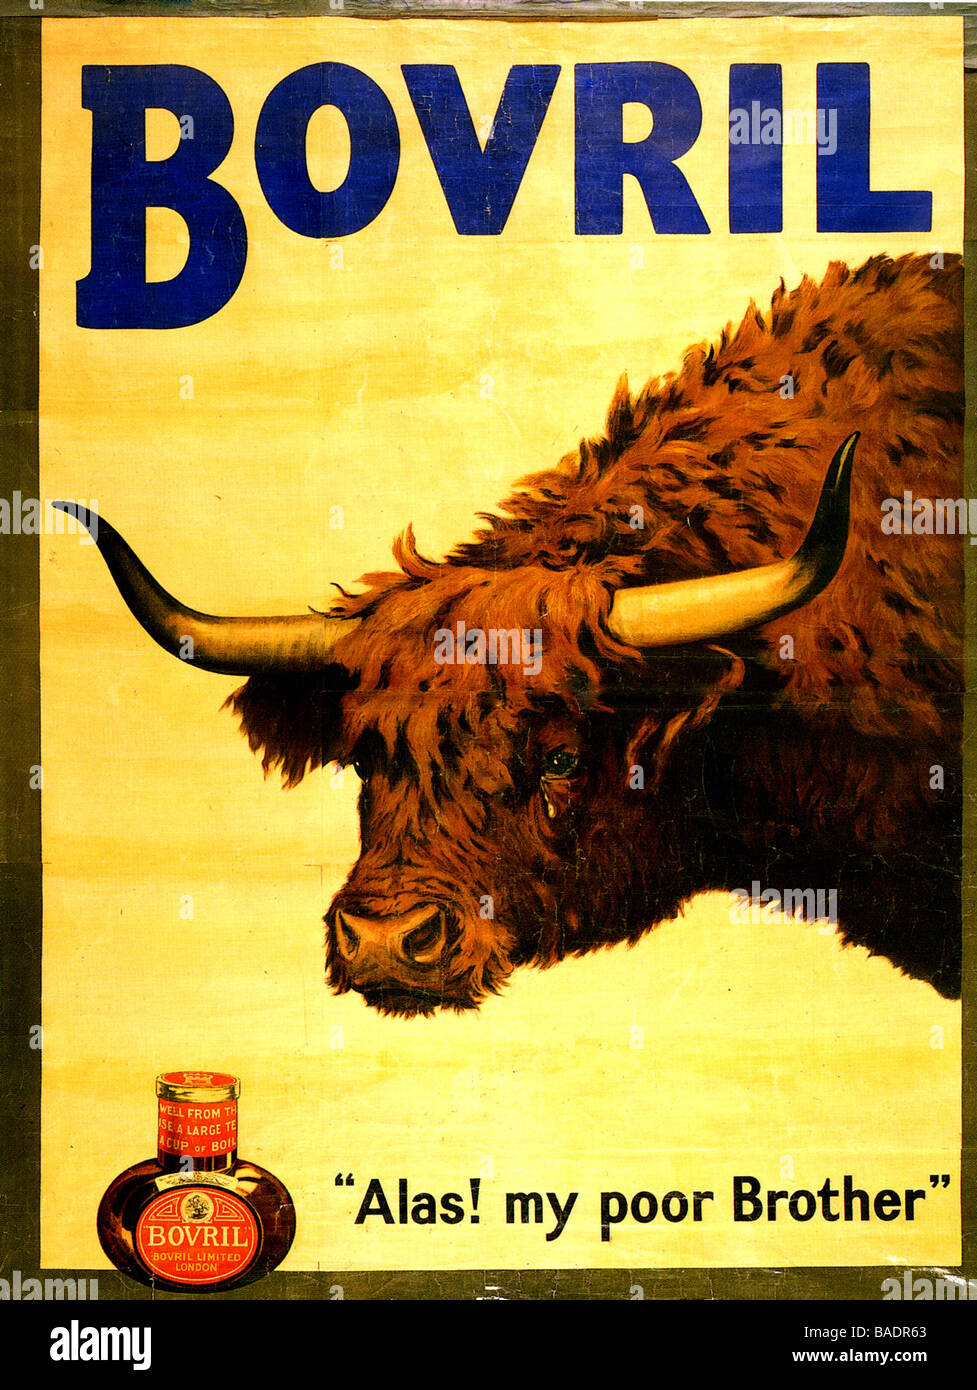 BOVRIL advert from 1905 Stock Photo